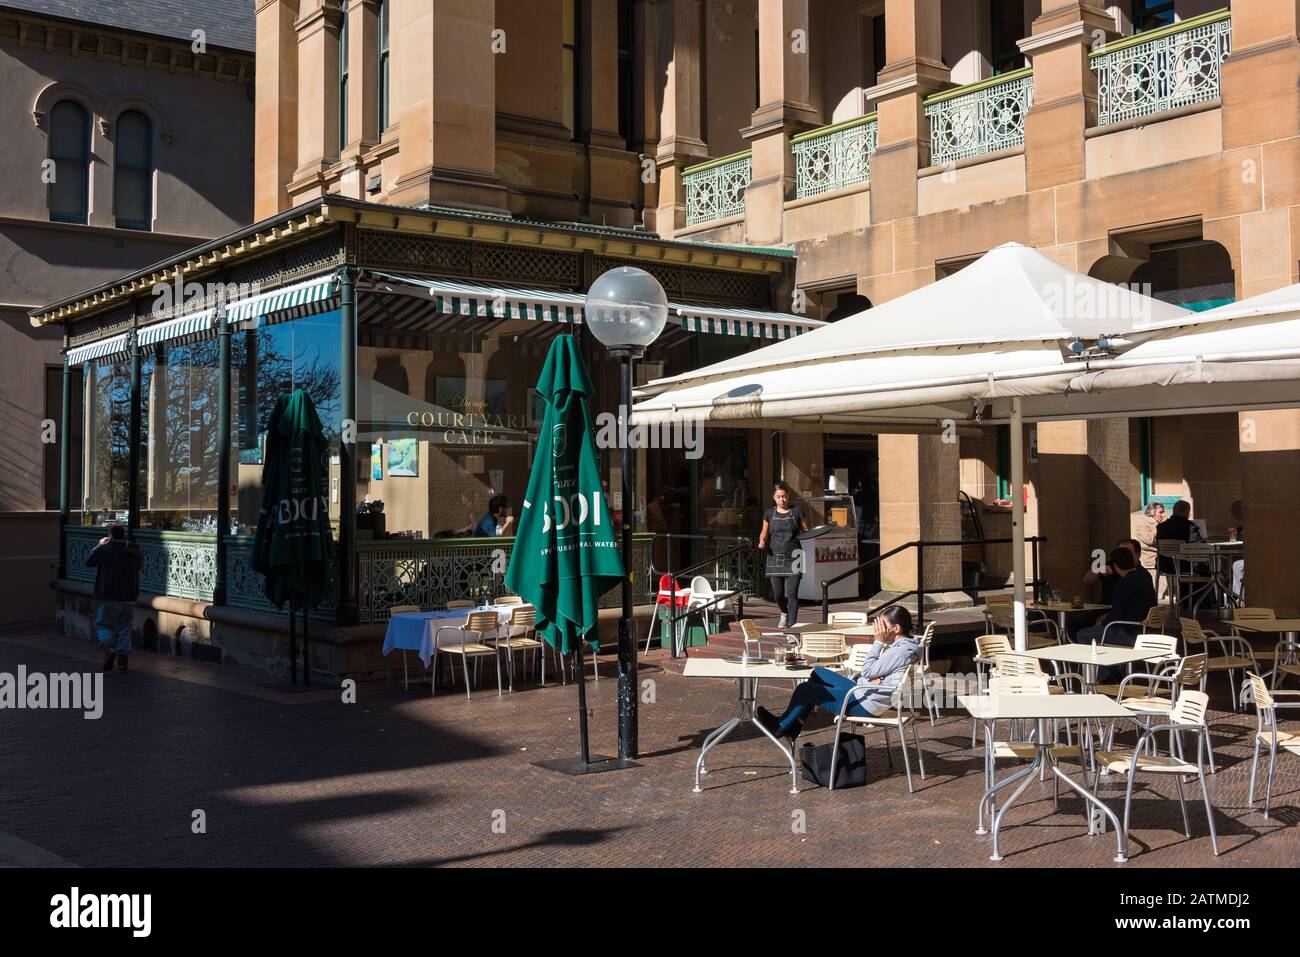 Sydney, Australia - July 3, 2016: Courtyard cafe with people relaxing and waitress bringing patrons order. Sydney Eye Hospital Courtyard cafe Stock Photo